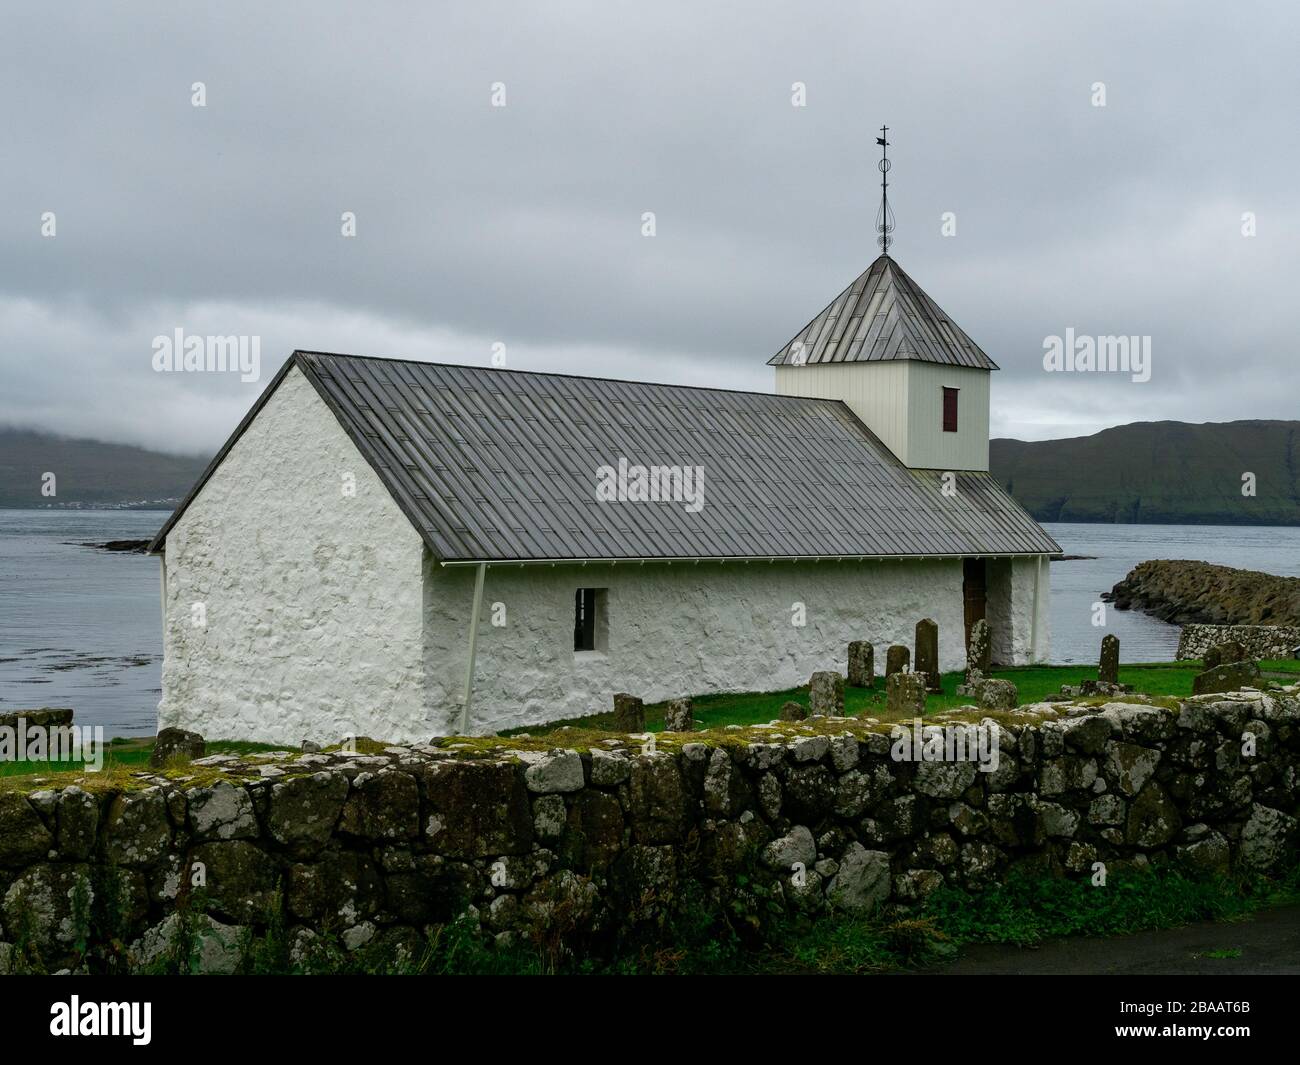 Faroe Islands. This charming white ST. OLAV’S church dates back to the 12th century and is still in use today, making it the oldest one in the Faroe I Stock Photo